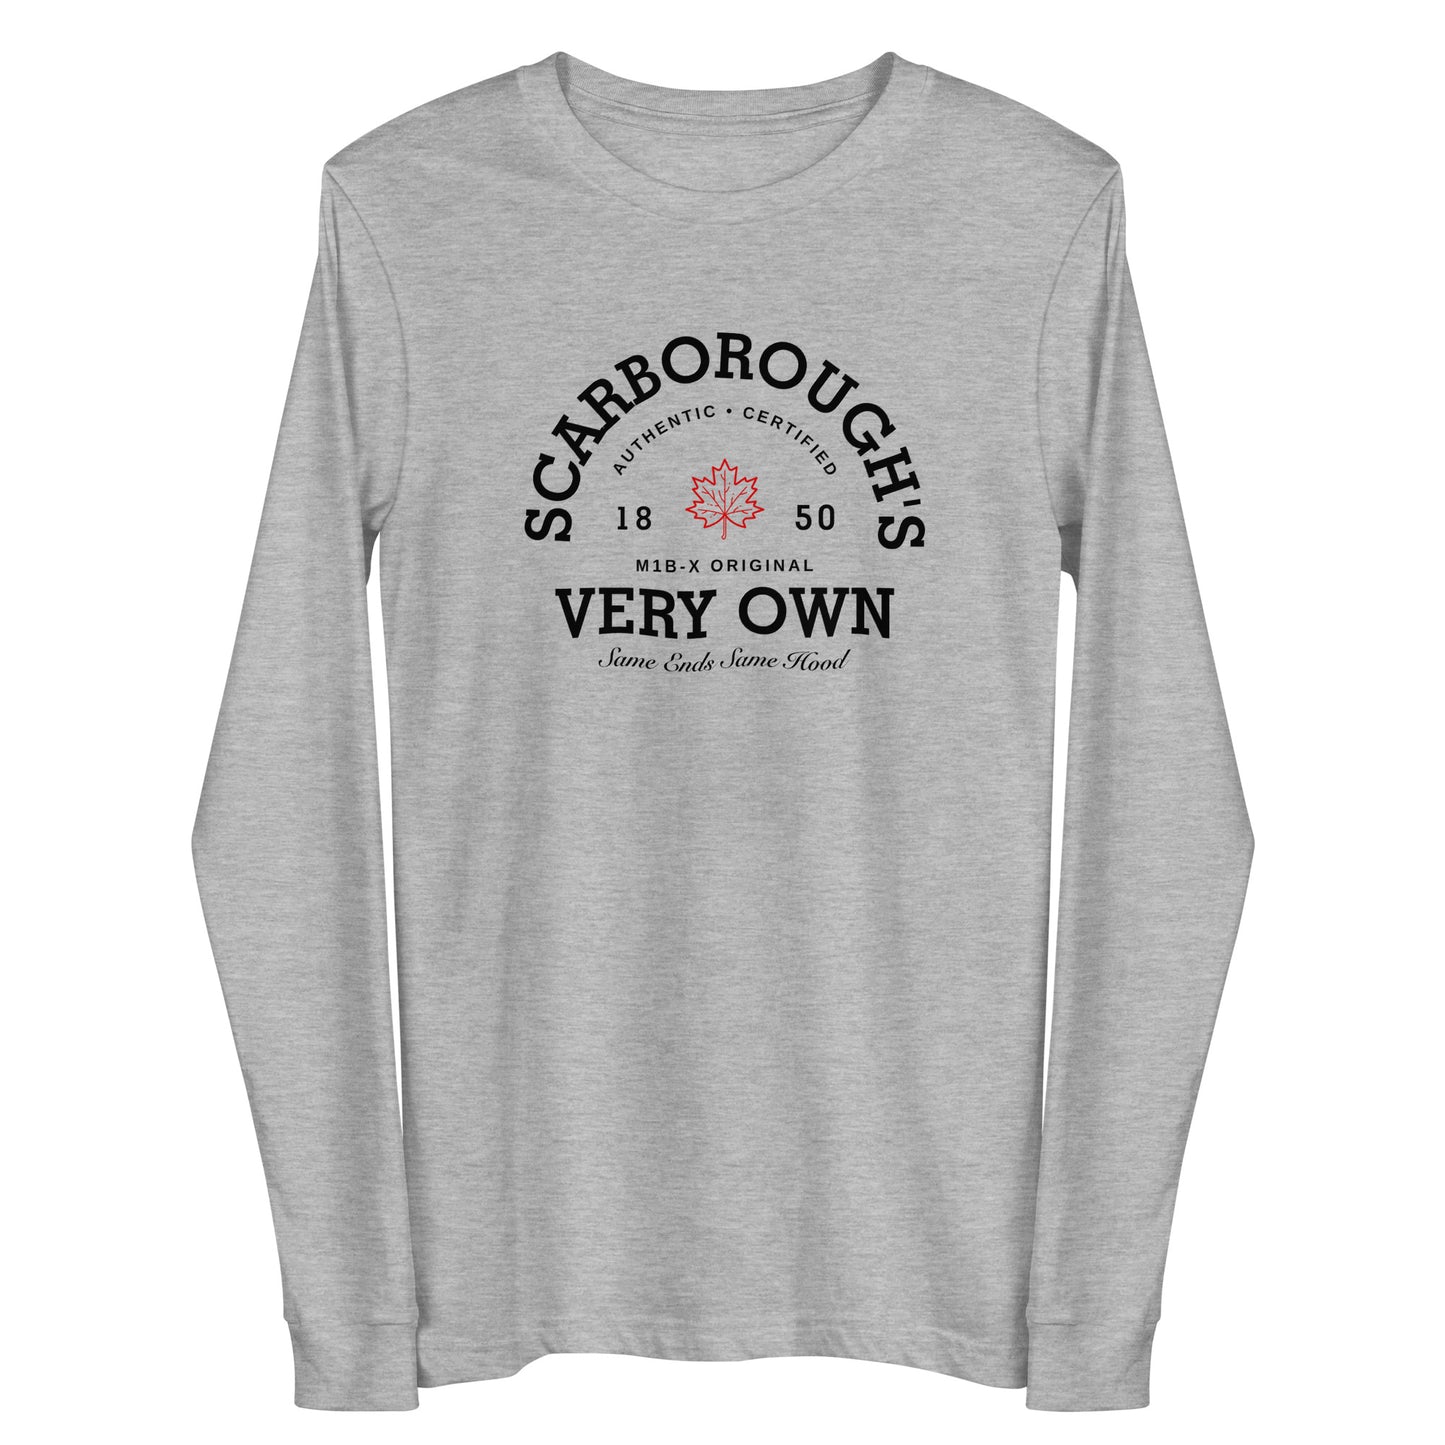 Scarborough's Very Own - Long Sleeve Tee